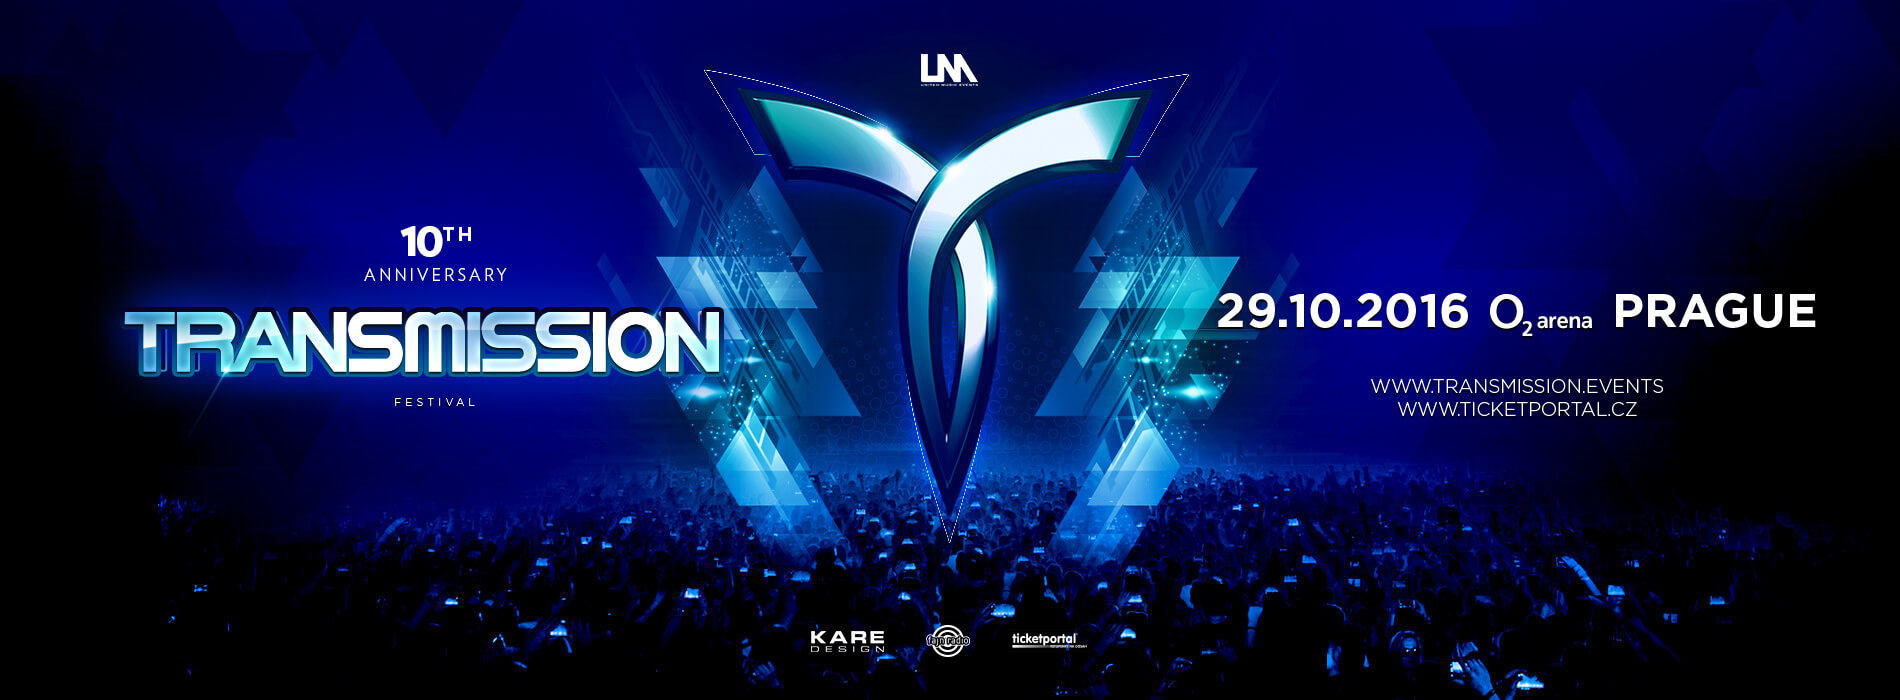 United Music Events presents Transmission Festival 2016 at O2 Arena, Prague, Czech Republic on 29th of October 2016 banner